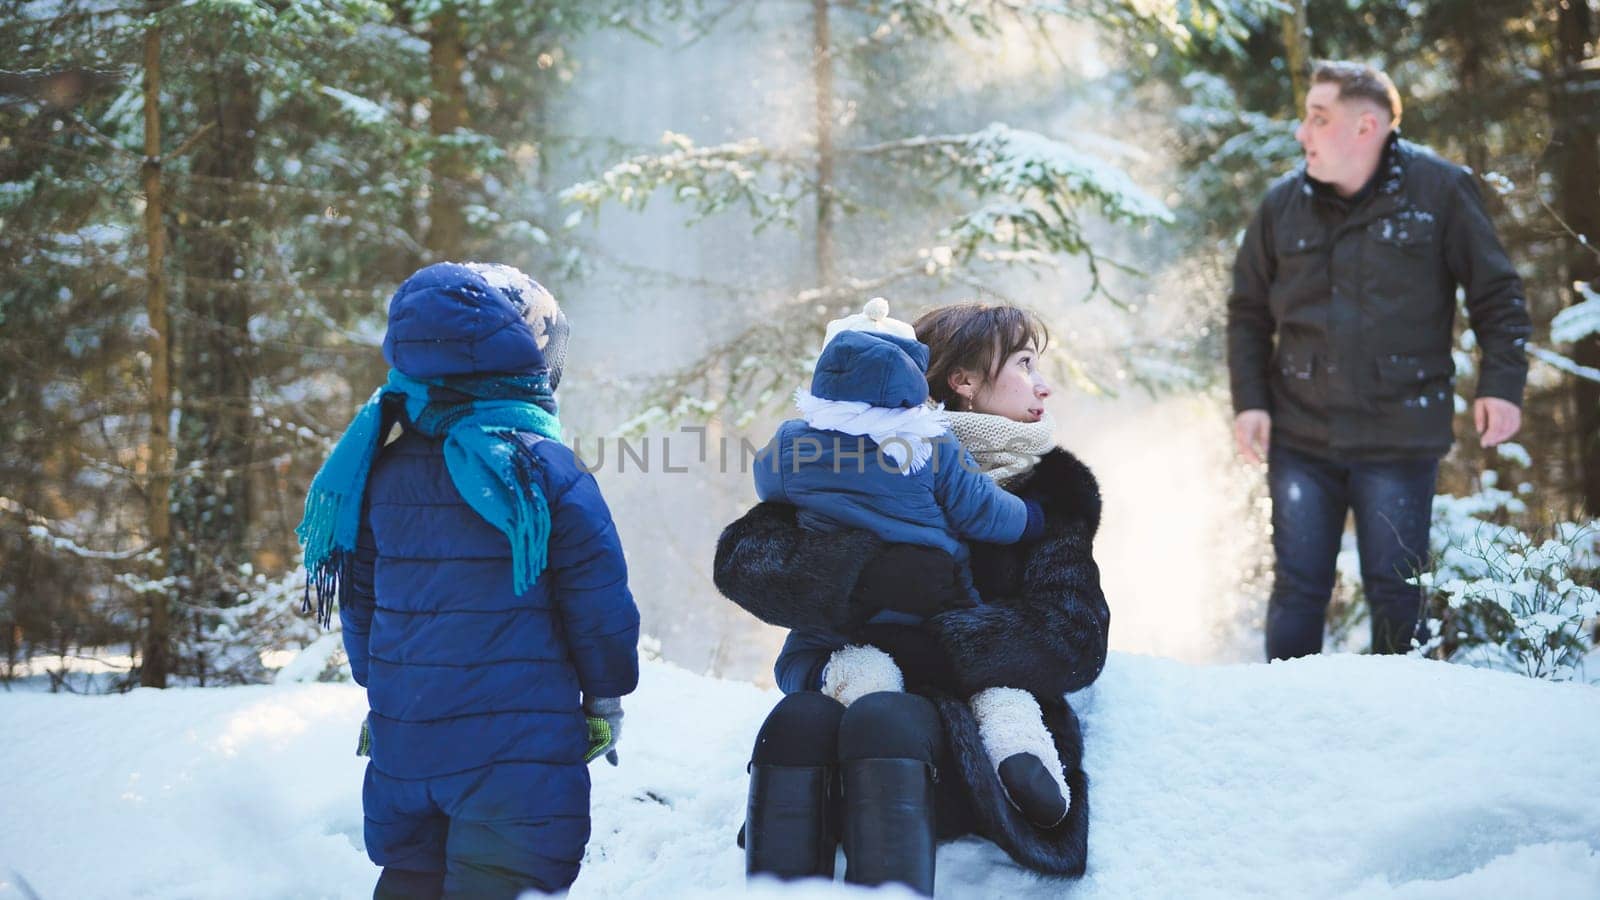 A happy family enjoying a winter sunny day in the woods. by DovidPro